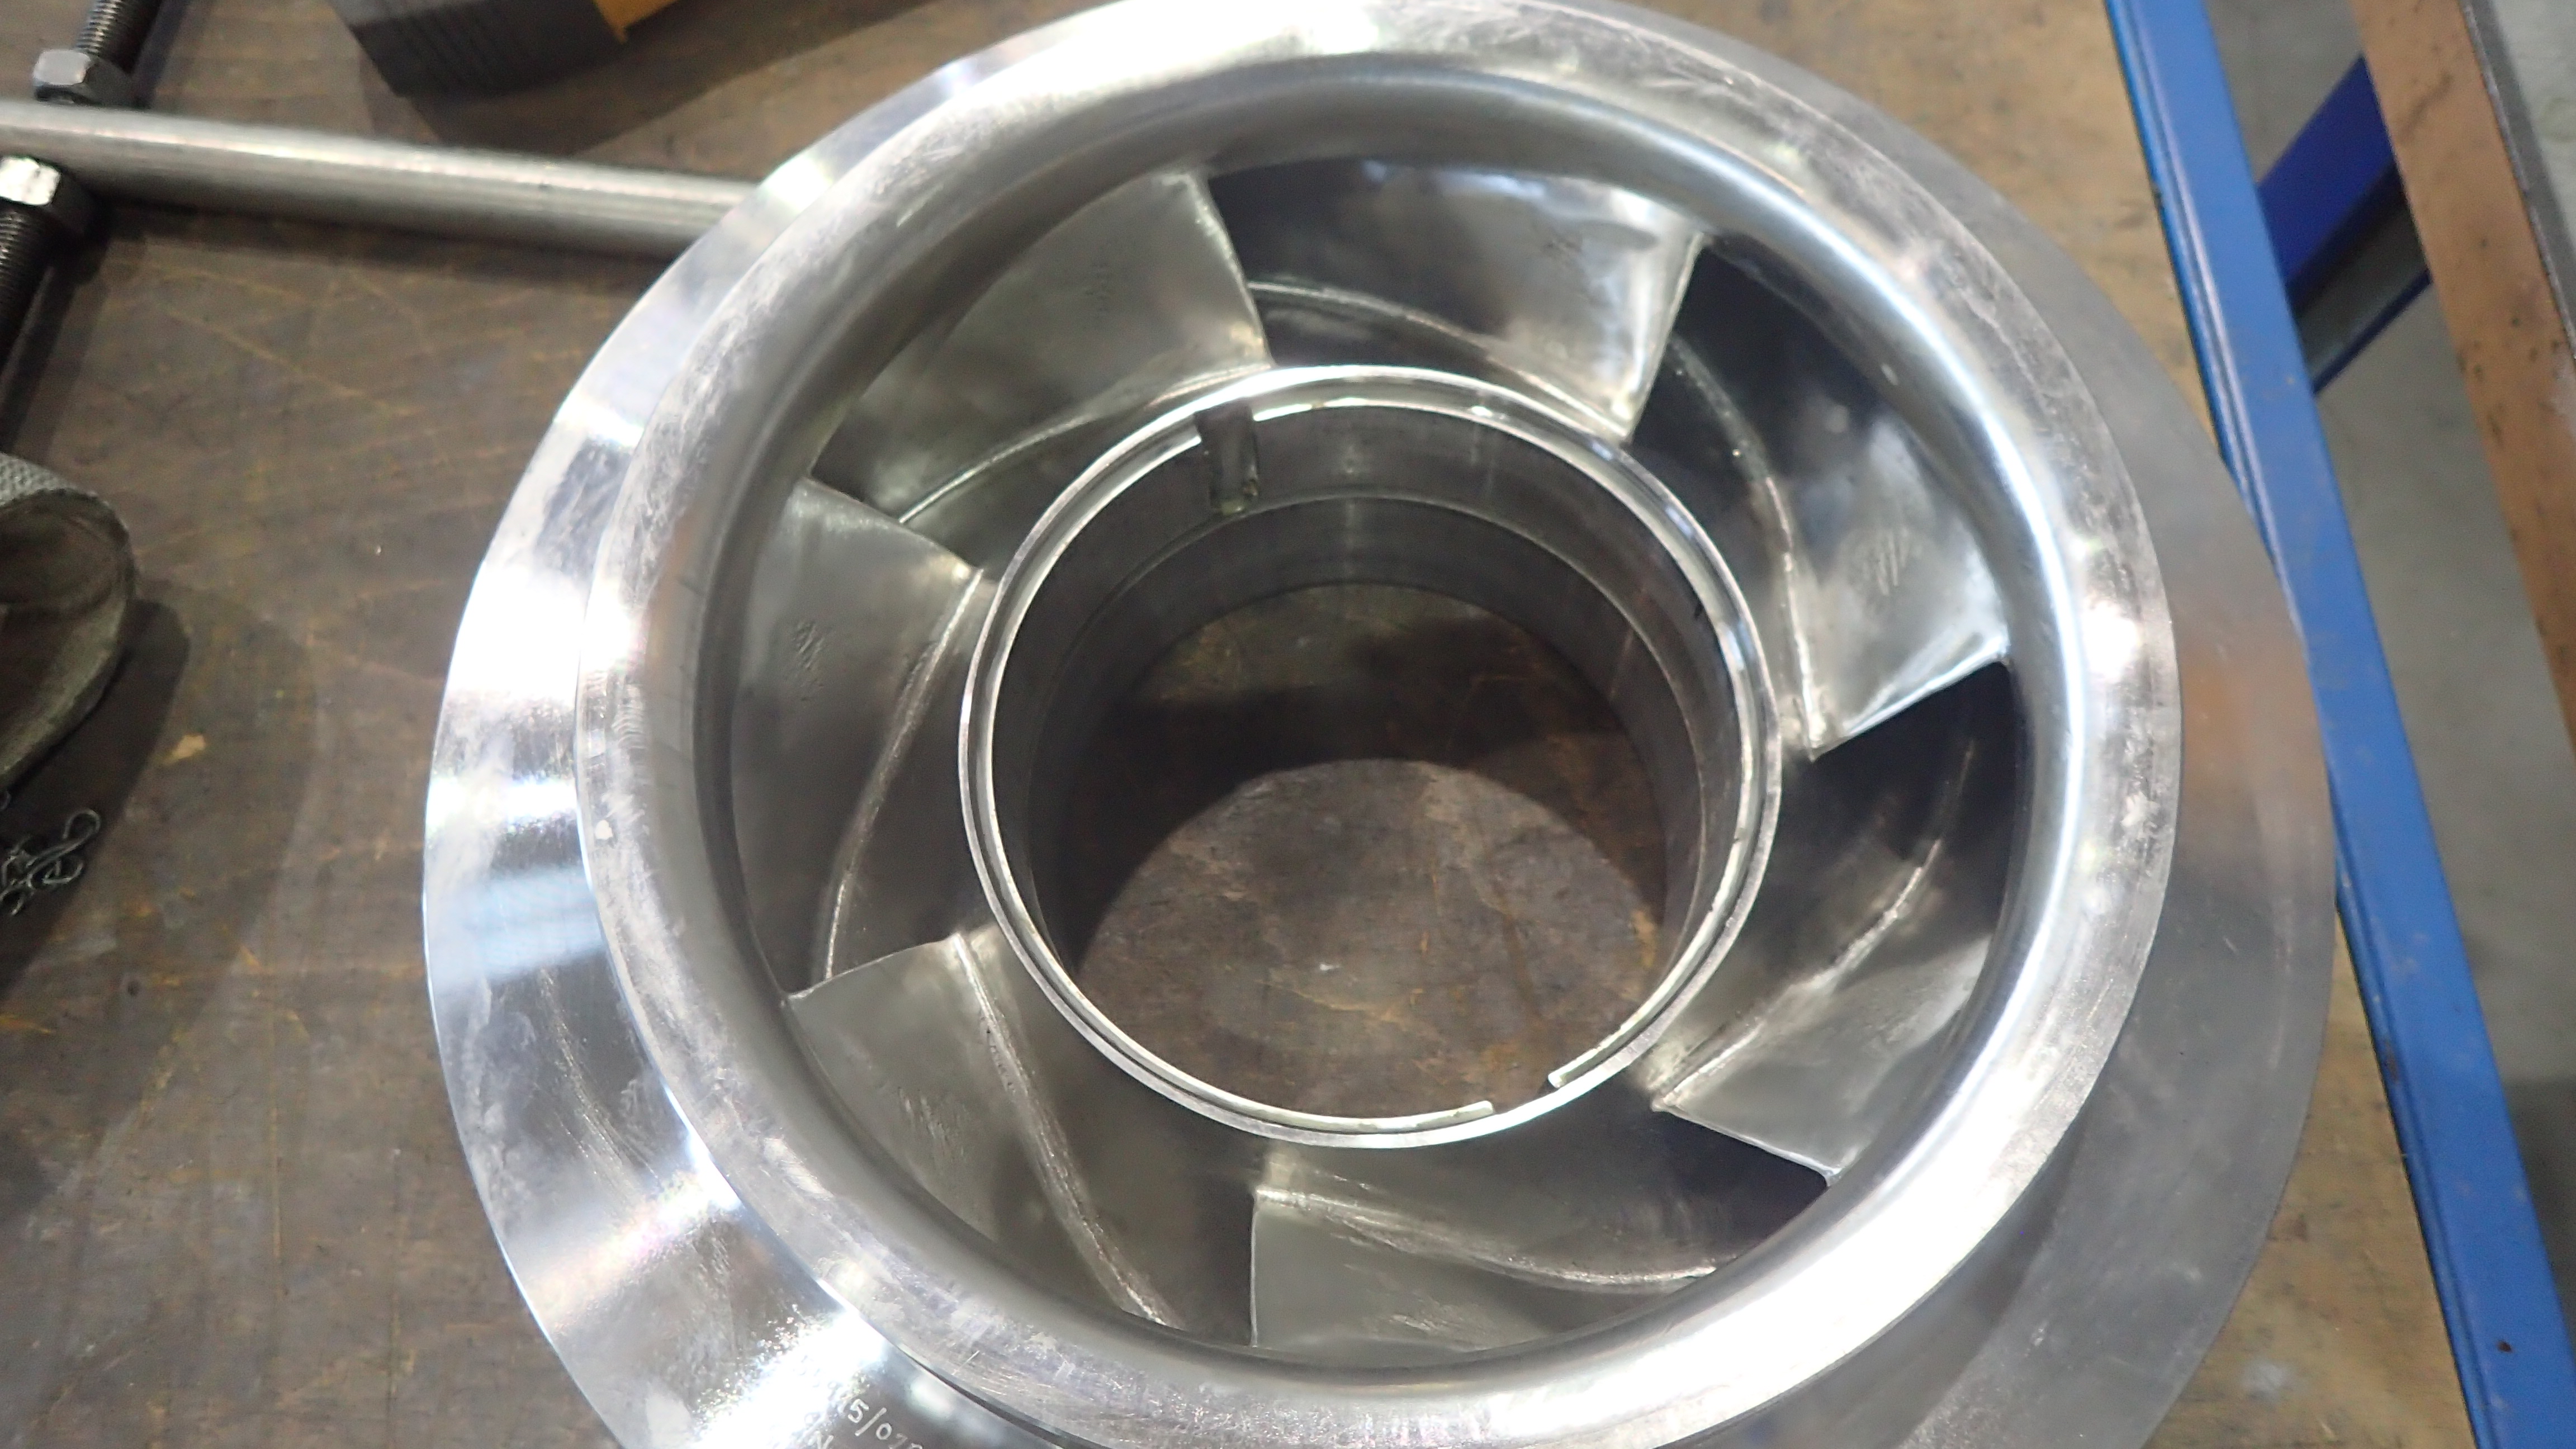 The completed impeller ready to be shipped back to Norway